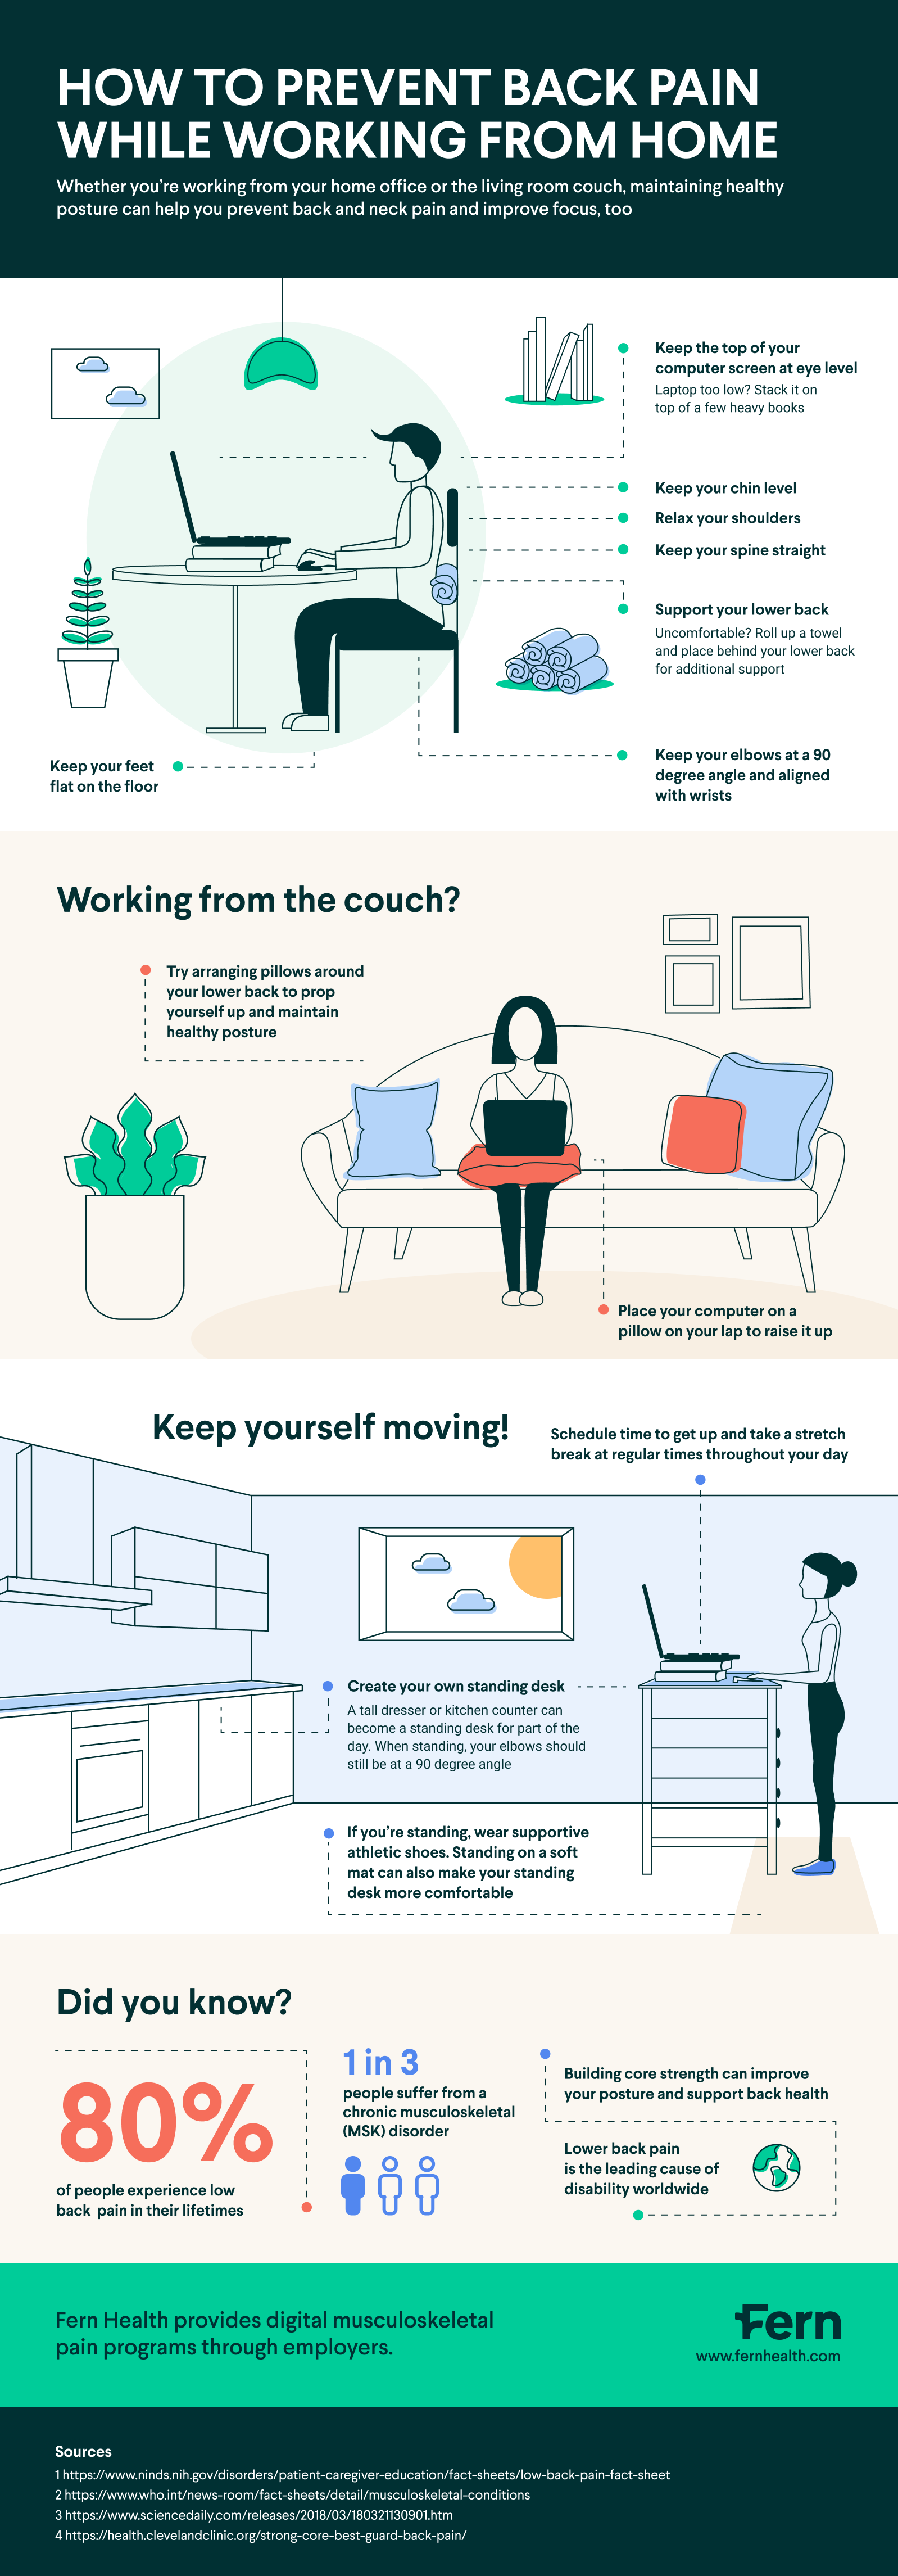 Prevent Back Pain while Working Remotely